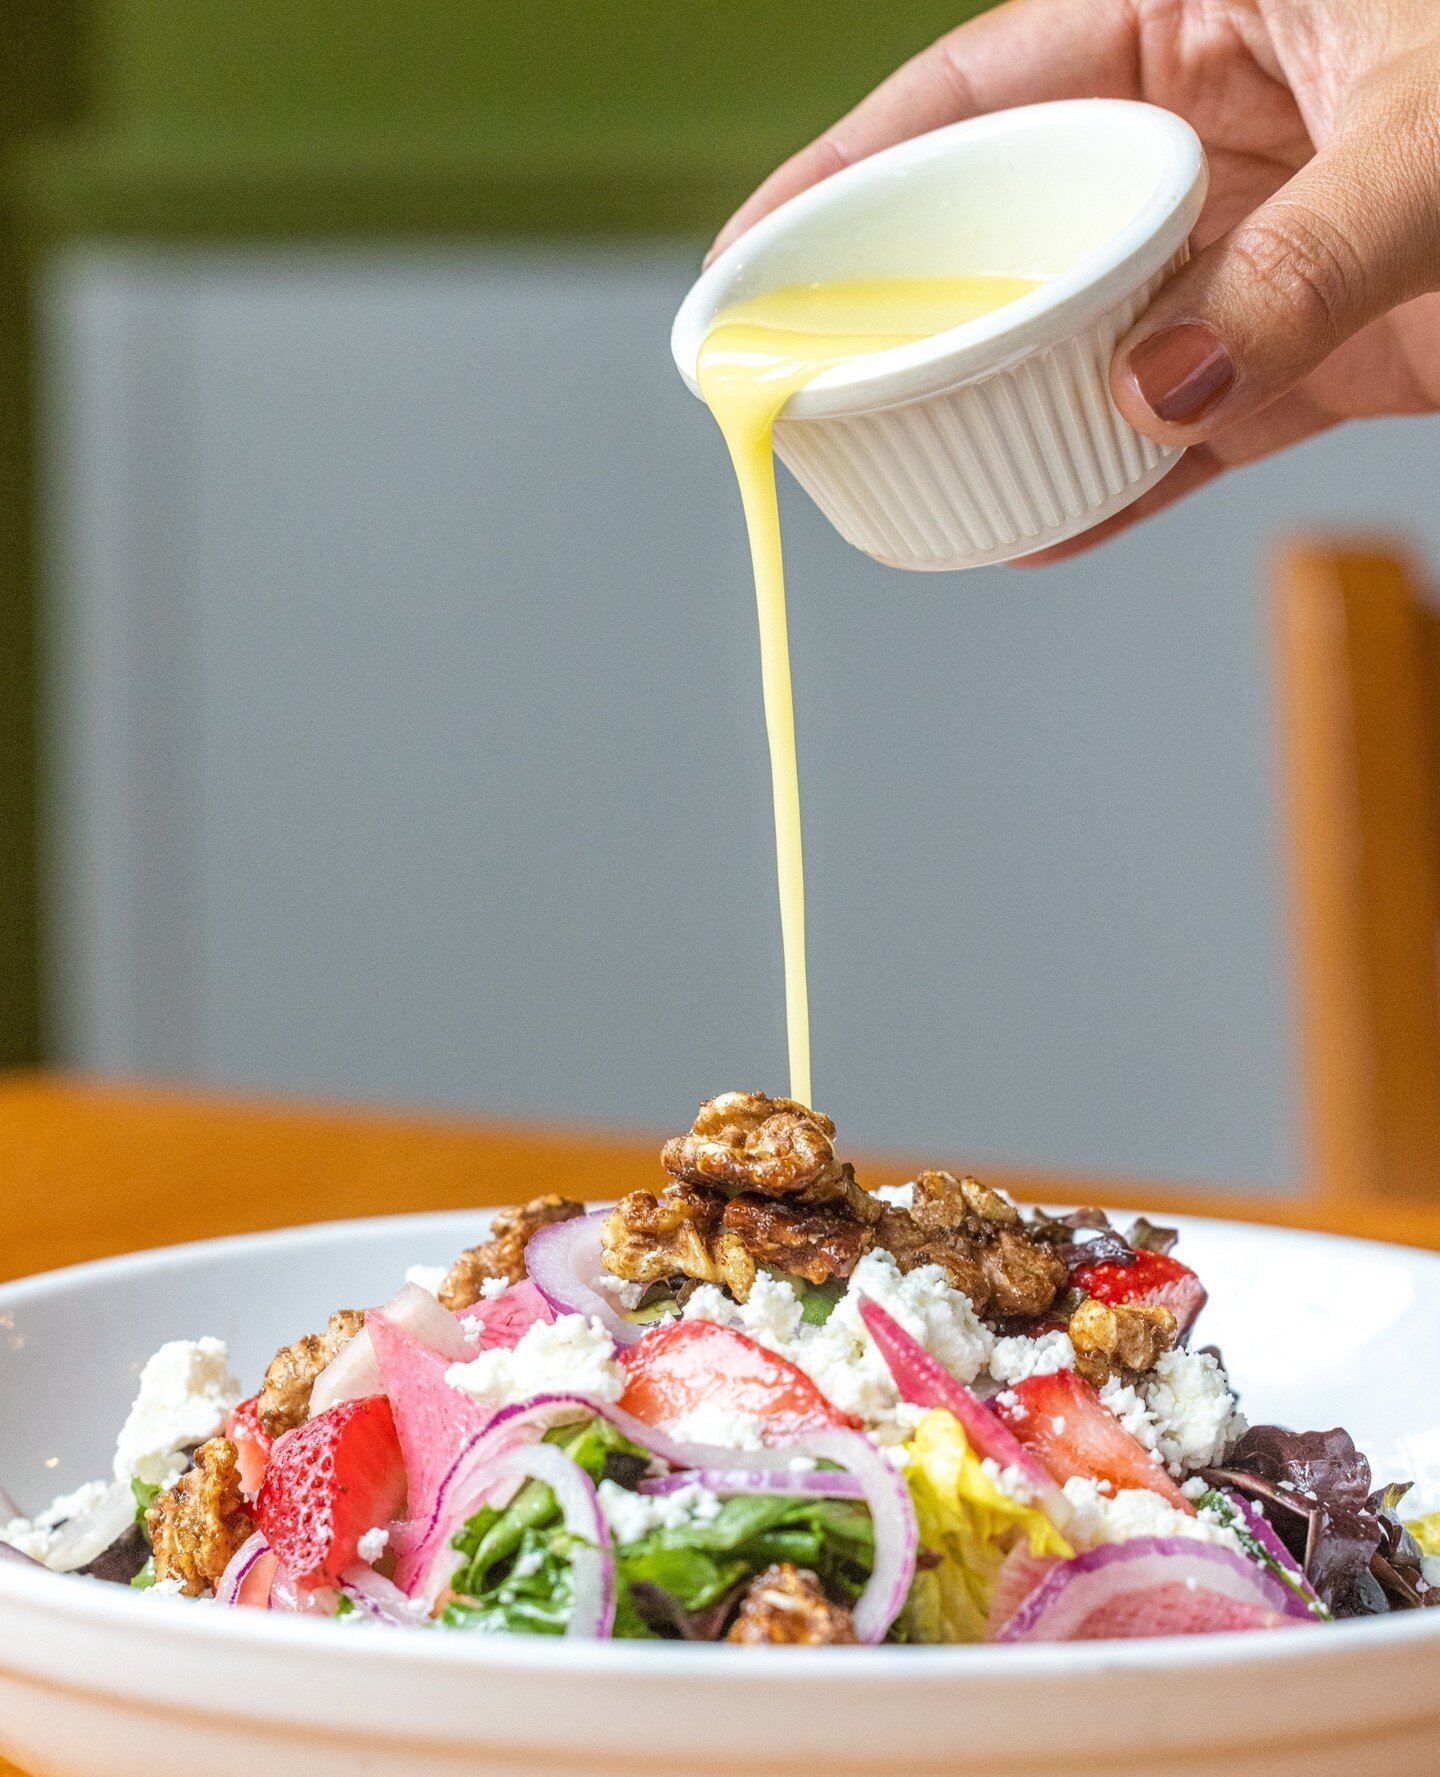 Meet our refreshing Summer Salad! ☀️⁠
⁠
Tender Mesclun Greens topped with Strawberries, Blueberries, Sliced Red Onion, Candied Walnuts, crisp Rainbow Radishes, Crumbled Feta, drizzled with sweet Orange-Maple Vinaigrette. ⁠